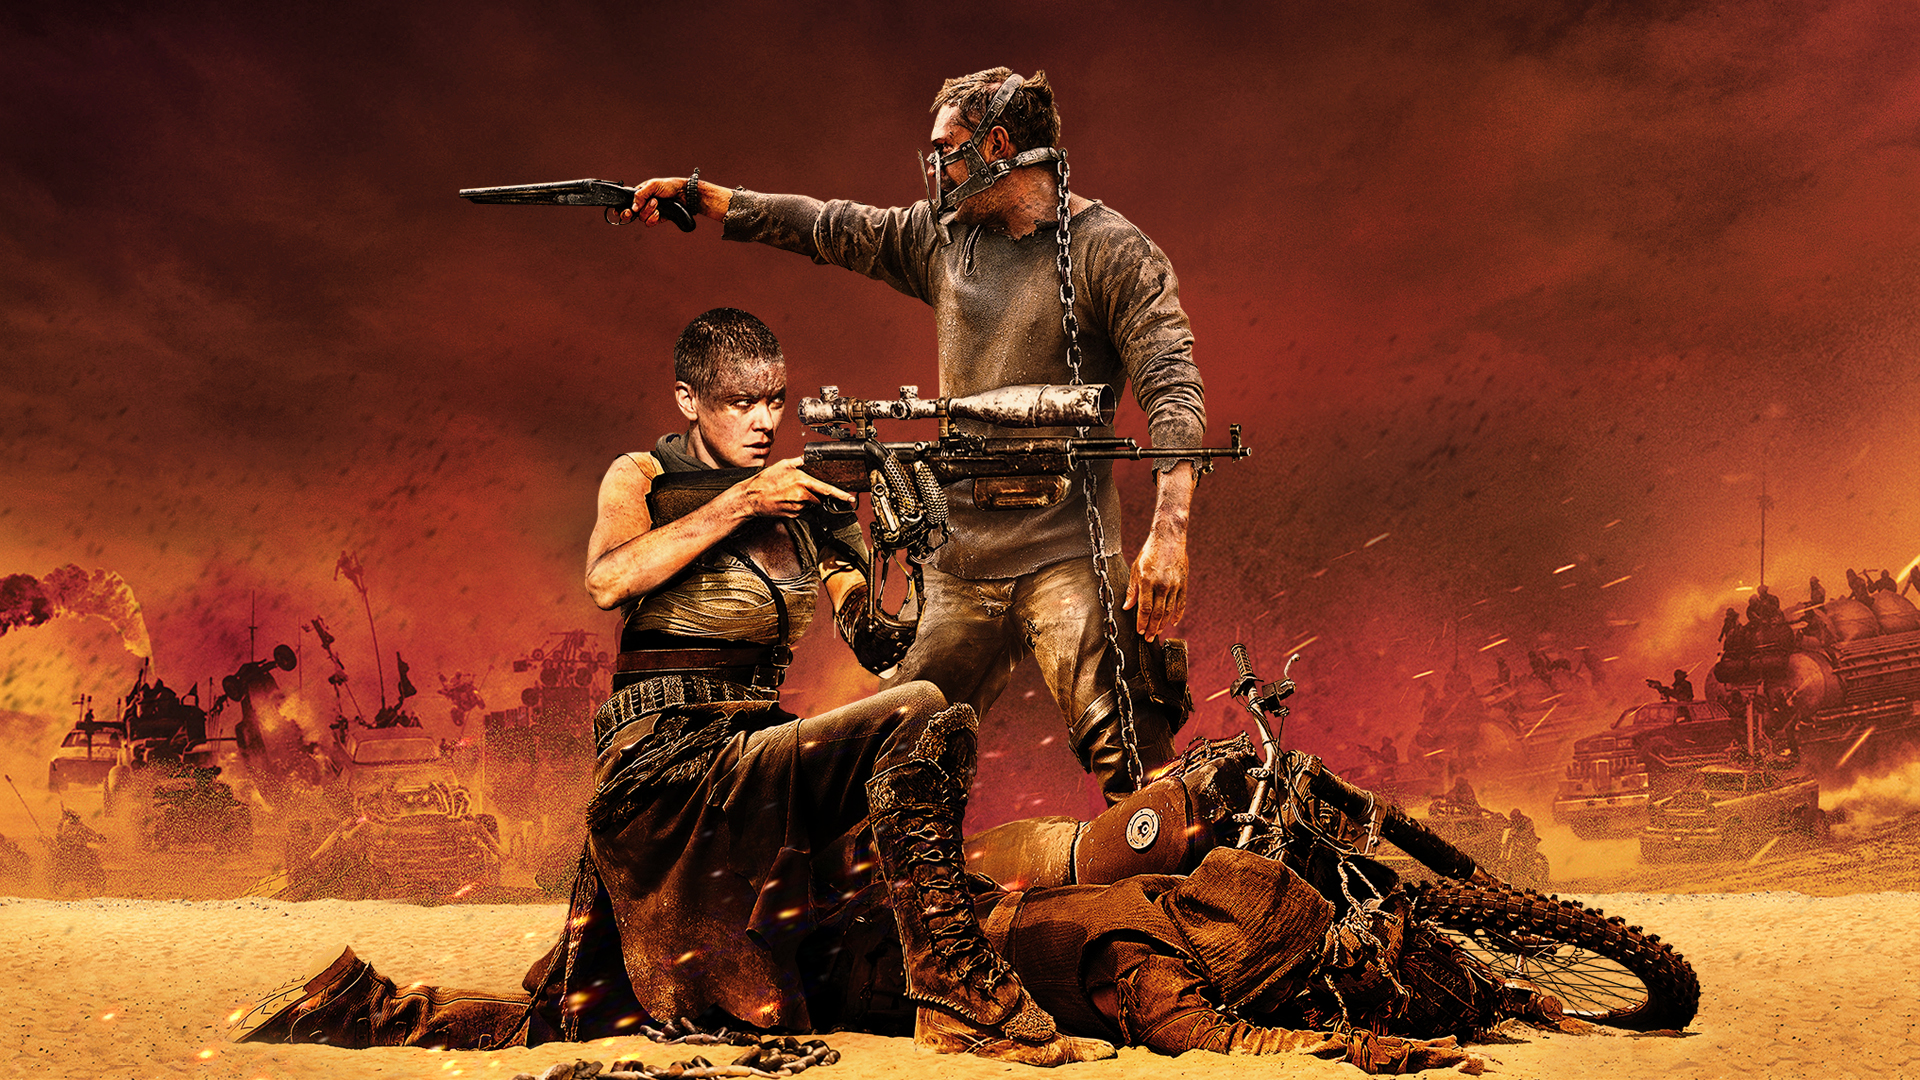 Mad Max Fury Road Wallpaper 1920x1080 by sachso74 on